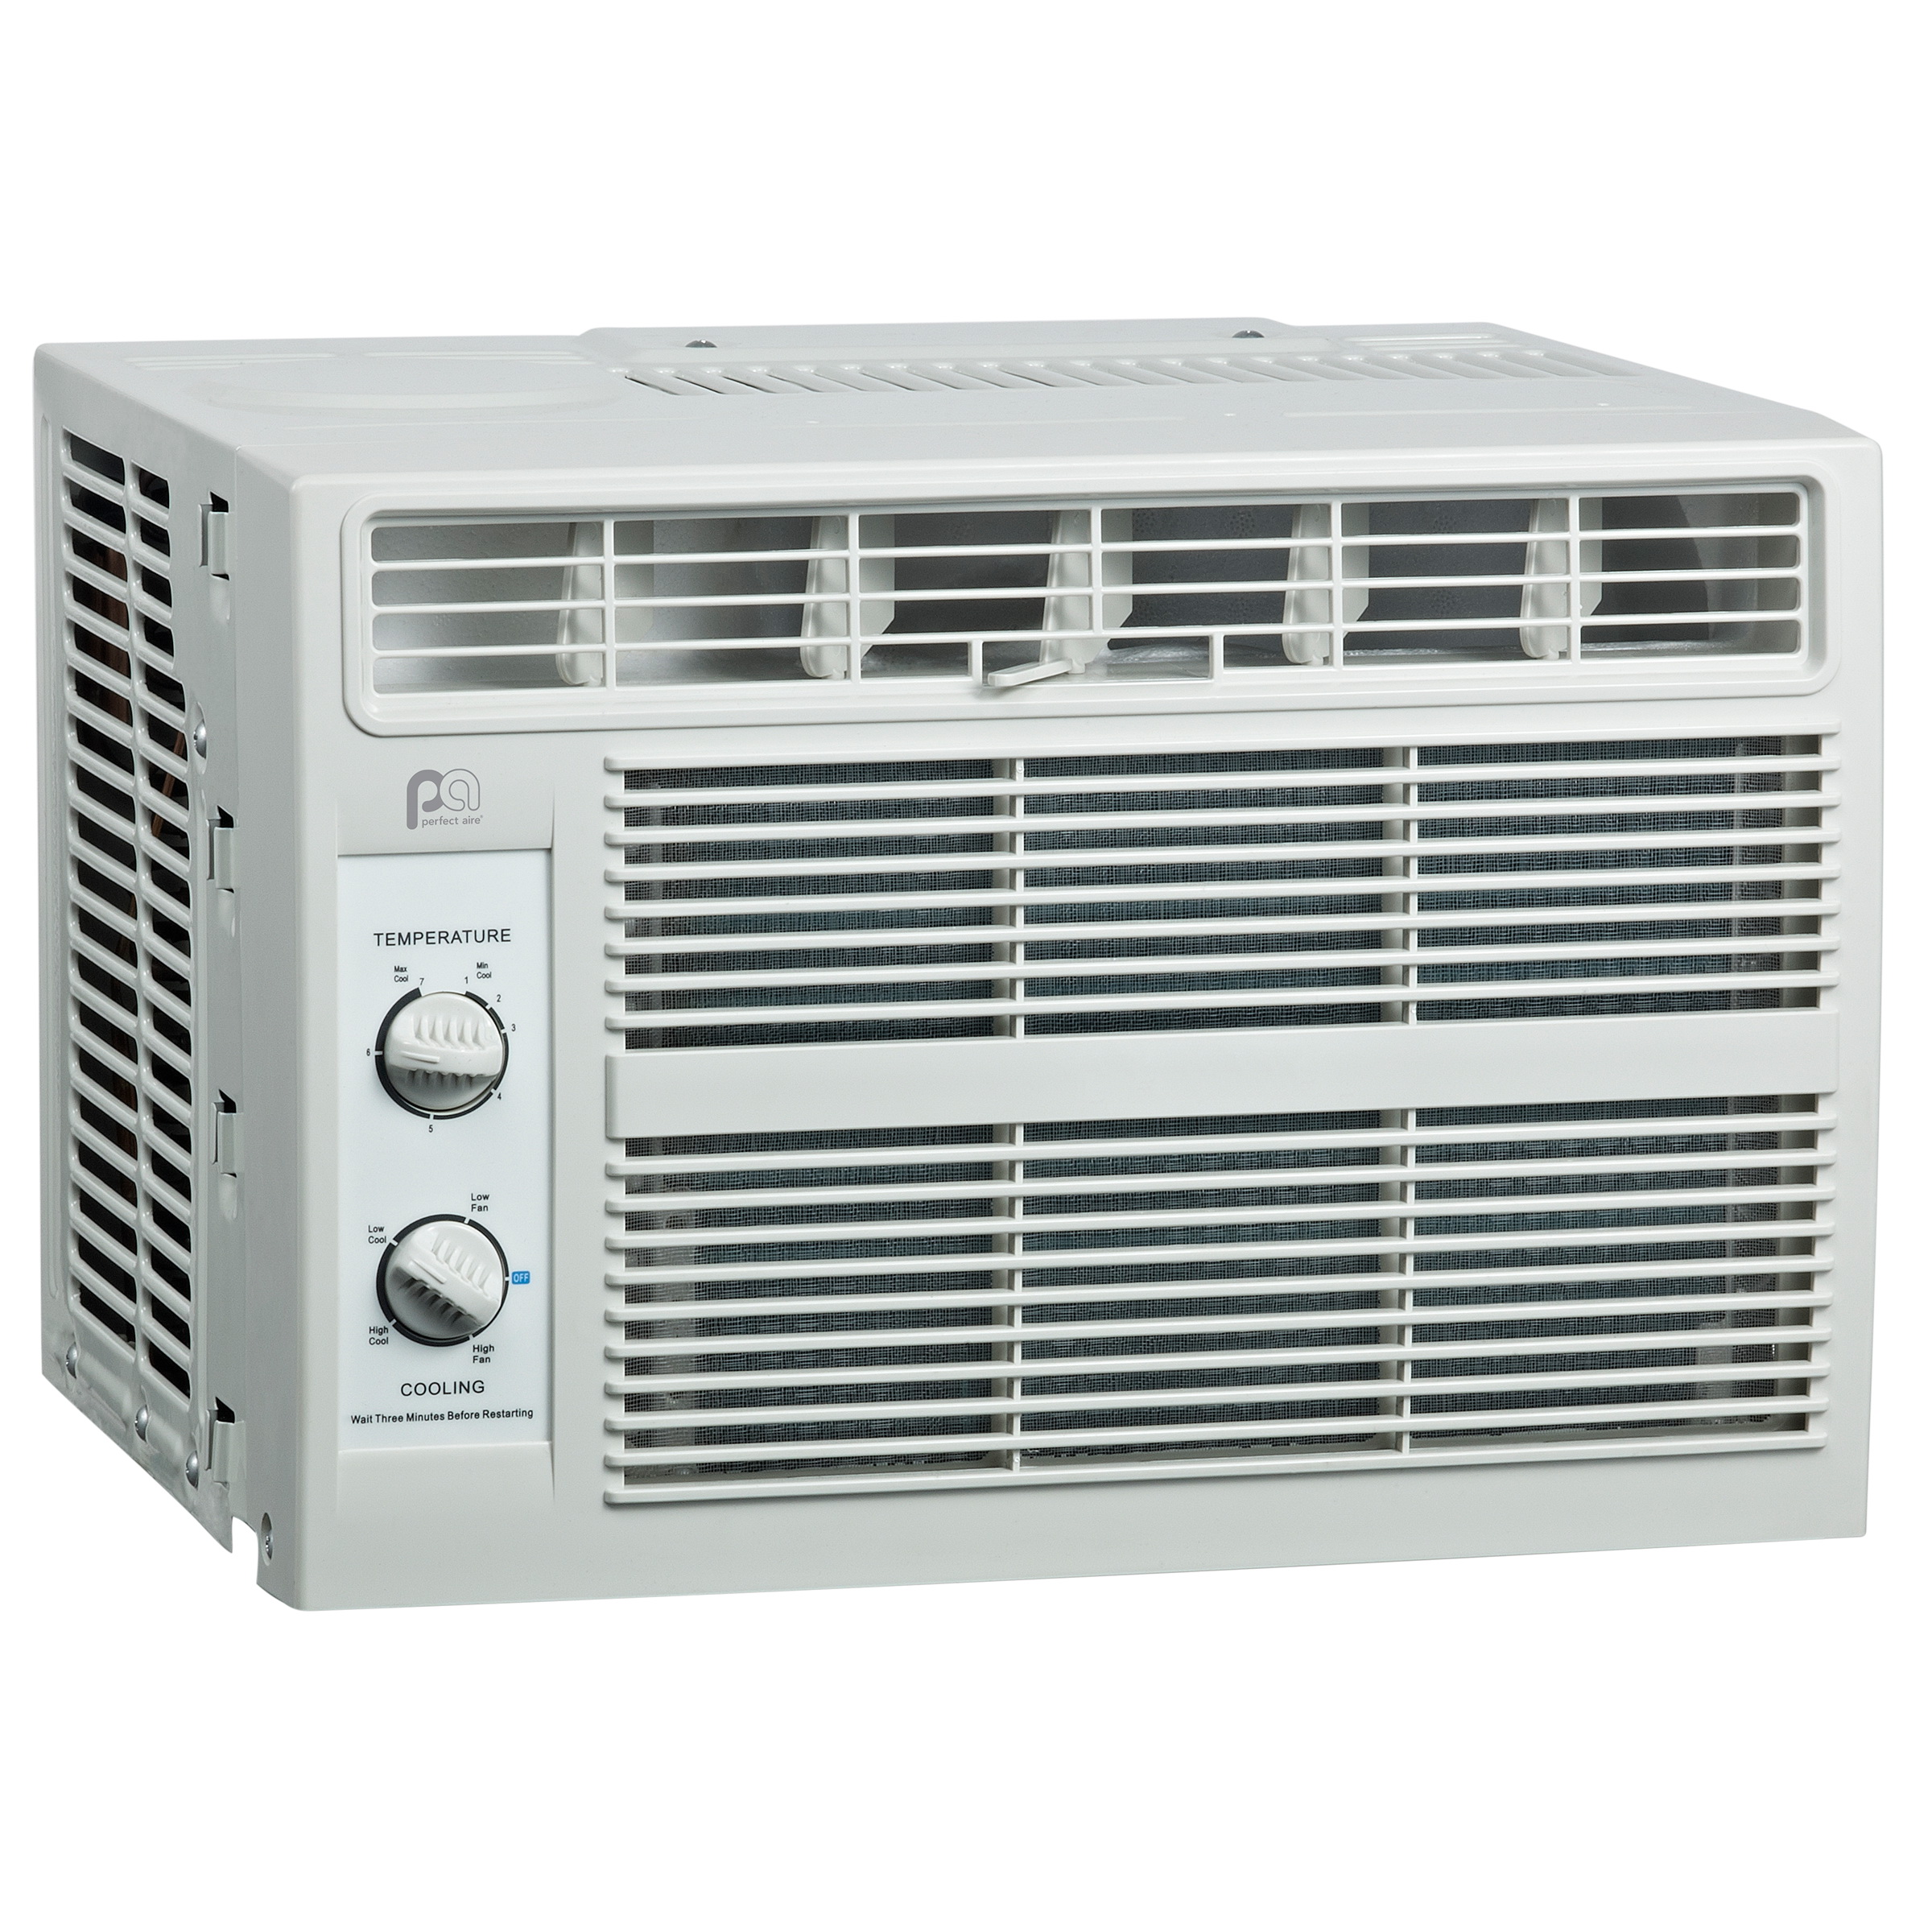 Perfect Aire 5PMC5000 Air Conditioner, 115 V, 5000 Btu Cooling, 100 to 150 sq-ft Coverage Area, Mechanical Control - 1